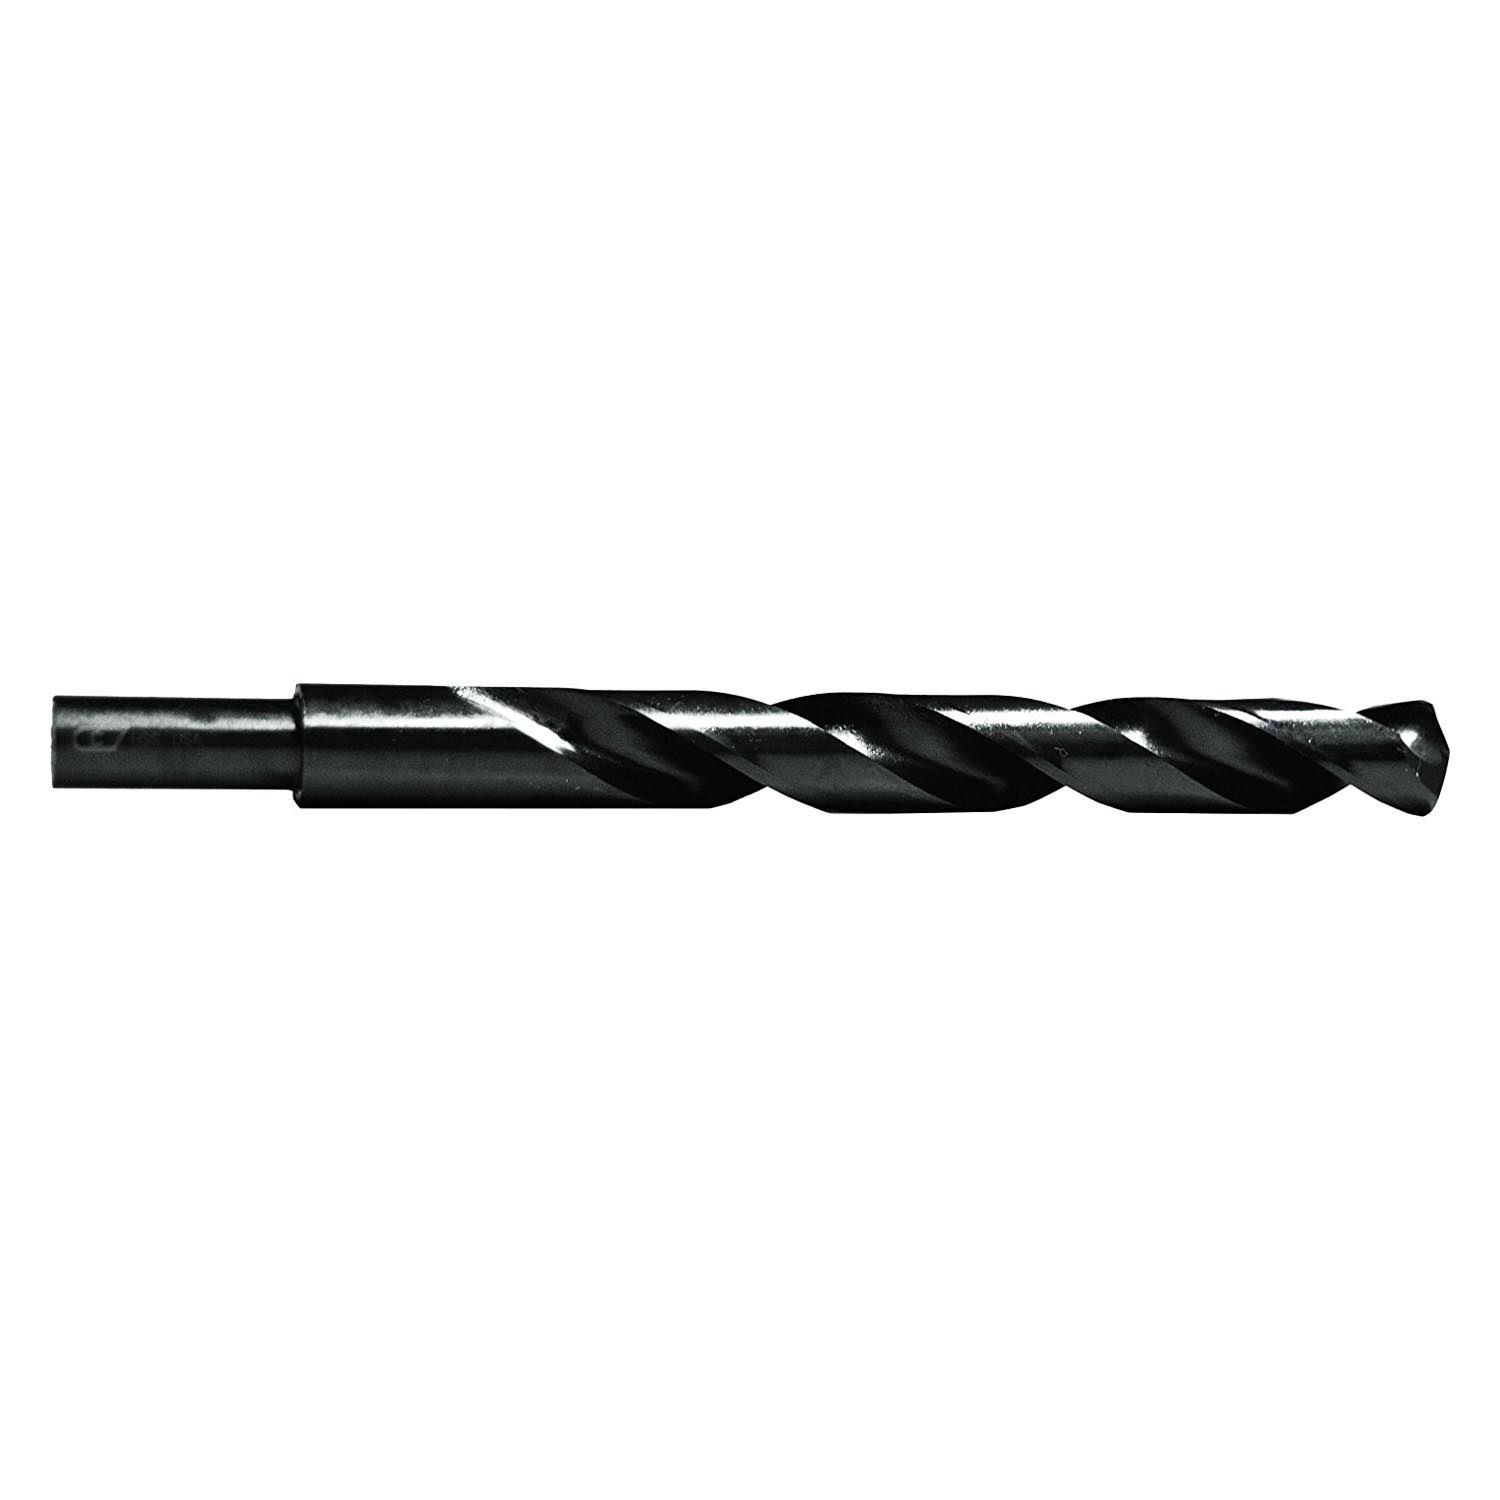 Century Drill and Tool 24726 Black Oxide High Speed Steel Drill Bit - 13/32"